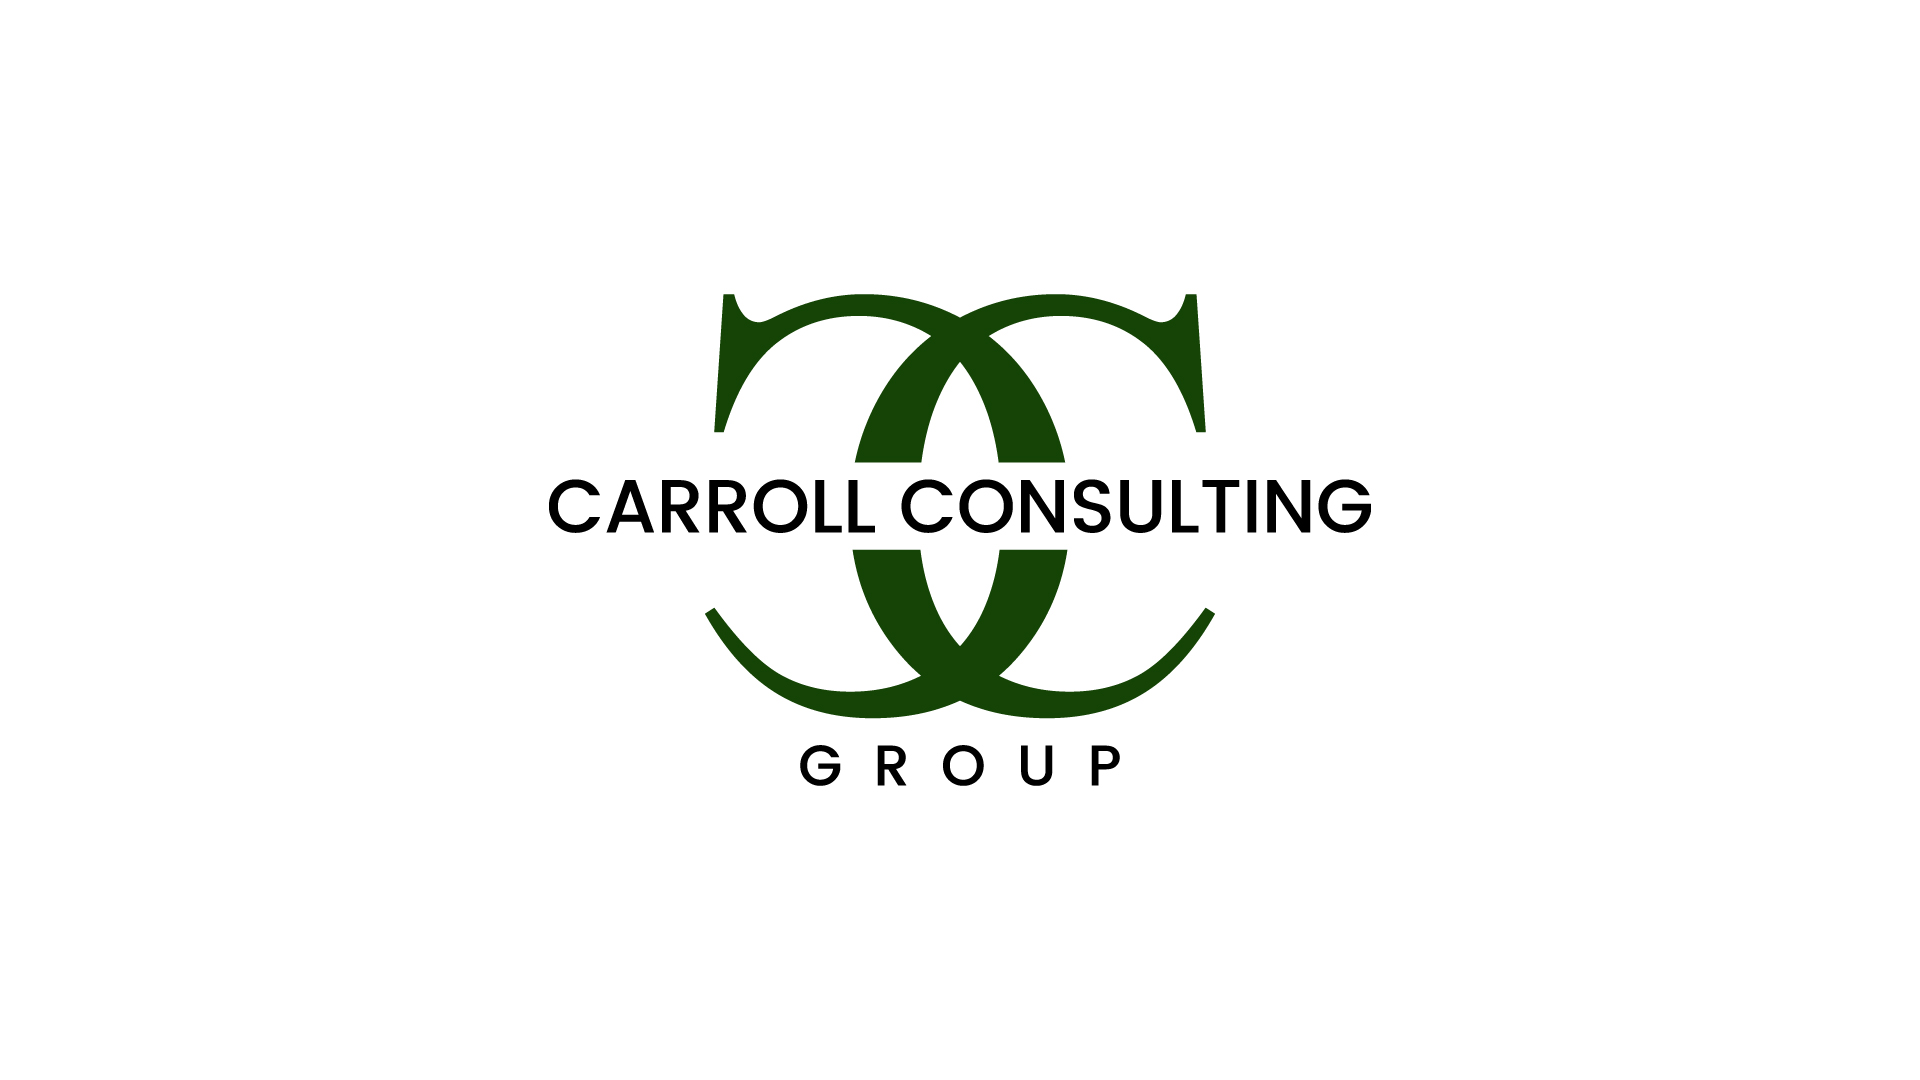 Carroll Consulting Group - Logo